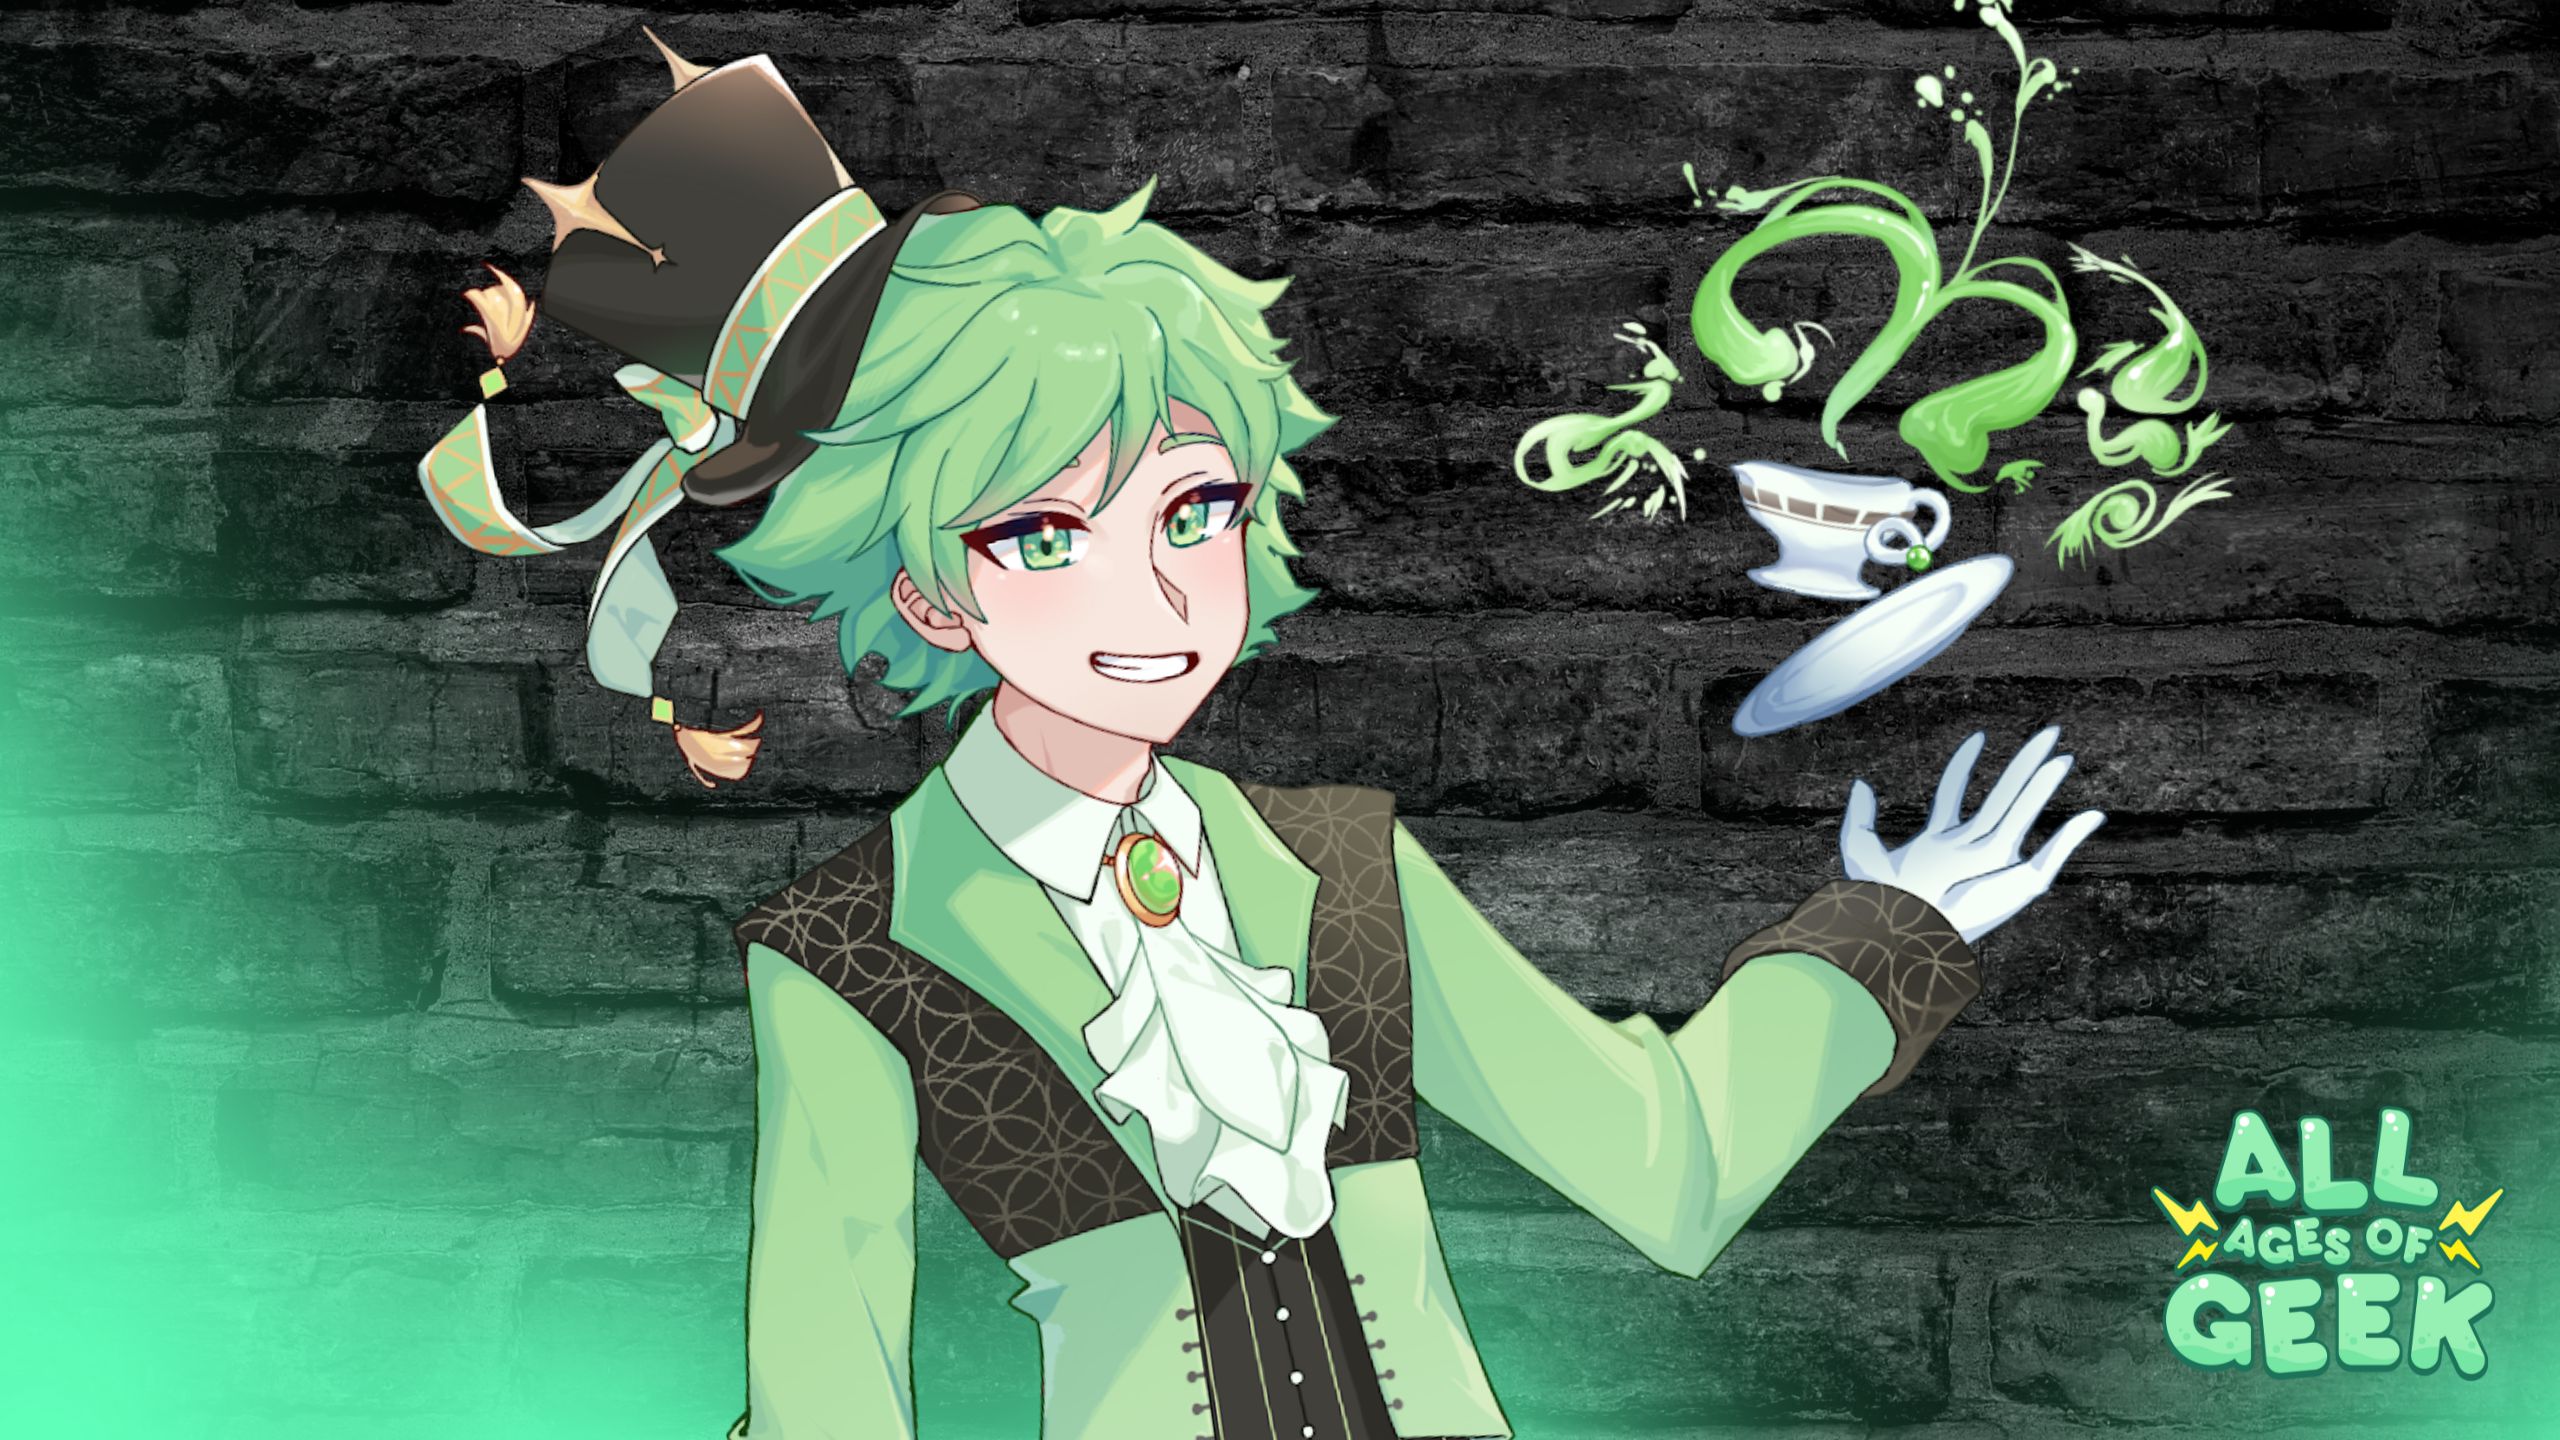 An illustration of a character with green hair, wearing a green and brown outfit, and a top hat with ribbons. The character is smiling and holding a floating tea cup and saucer with green, whimsical patterns emanating from it. The background is a dark brick wall with a green gradient at the bottom. The All Ages of Geek logo is present in the bottom right corner.